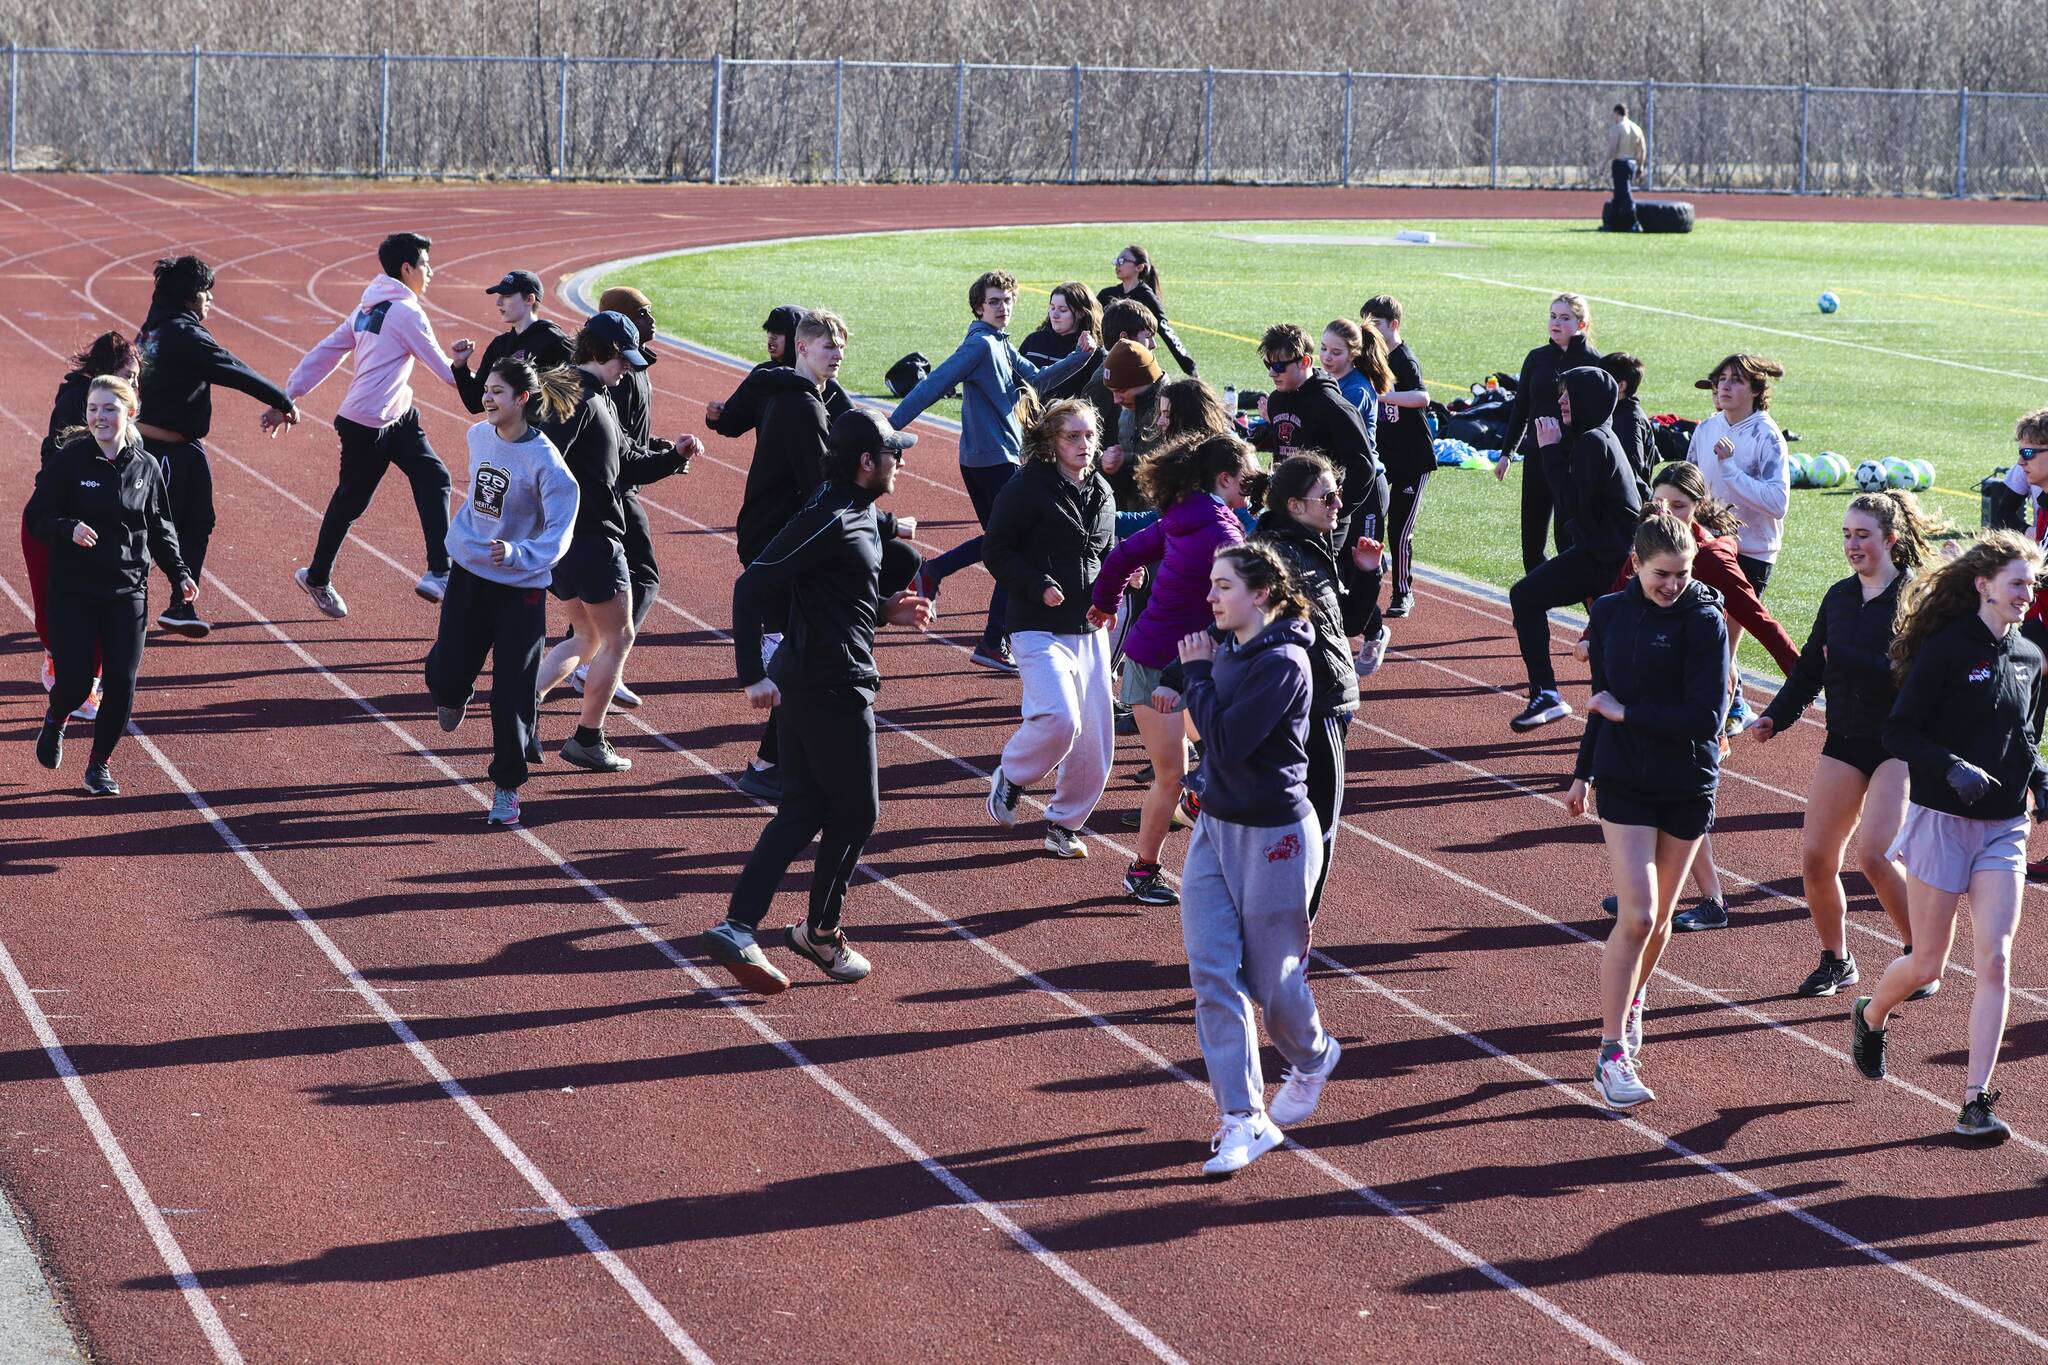 The JDHS track and field team does a warm-up exercise during practice at TMHS on April 14, 2022. (Michael S. Lockett / Juneau Empire)